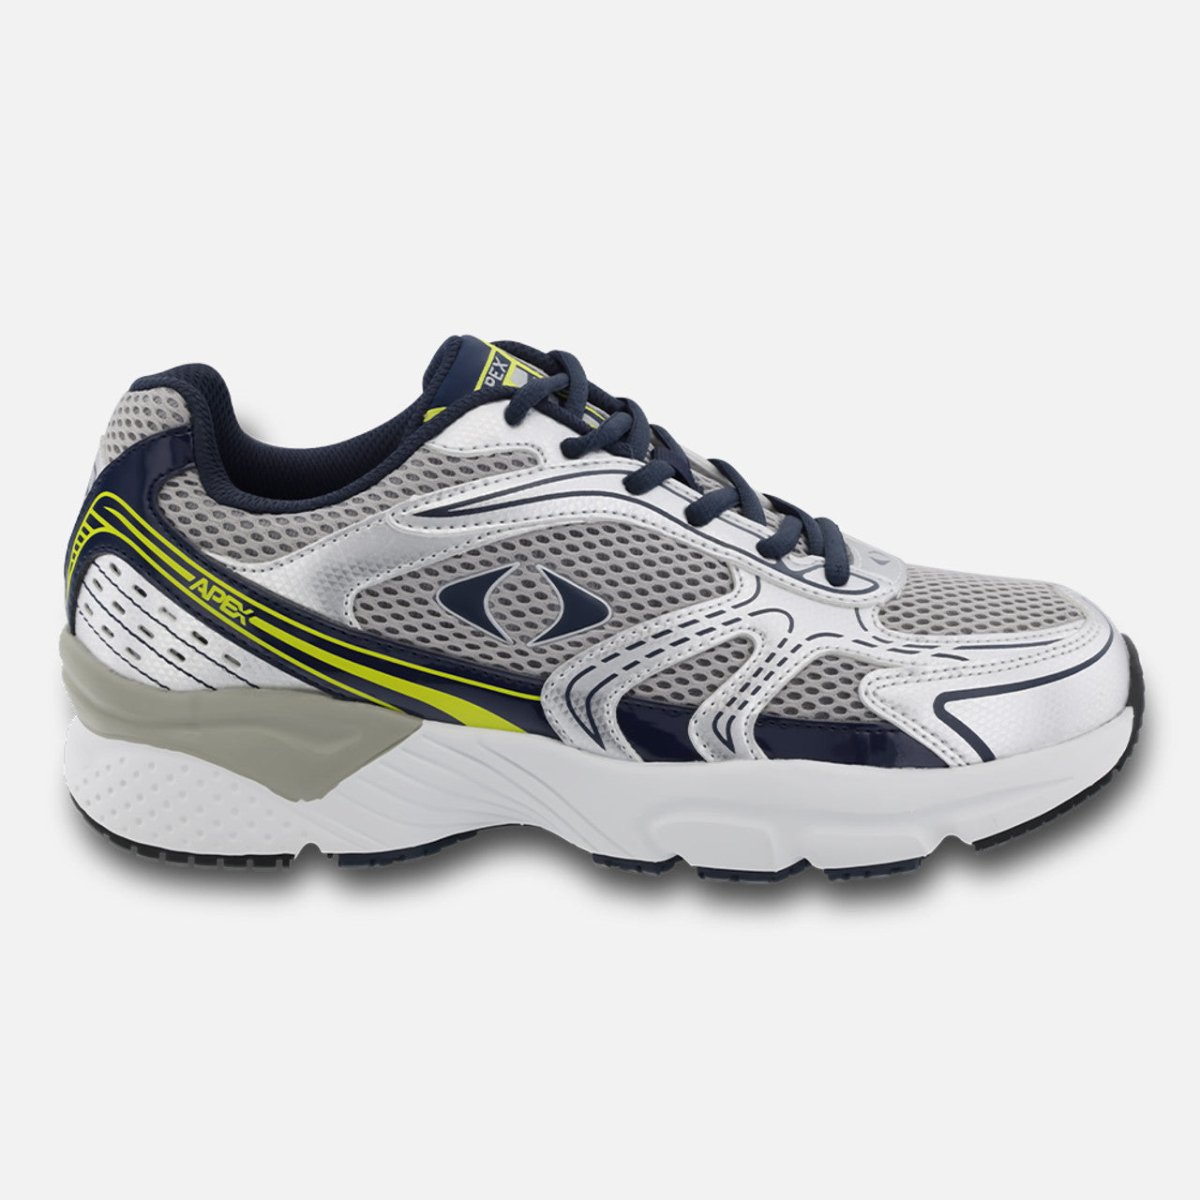 APEX X523M BOSS RUNNER MEN'S ACTIVE SHOE X LAST IN SILVER/BLUE - TLW Shoes